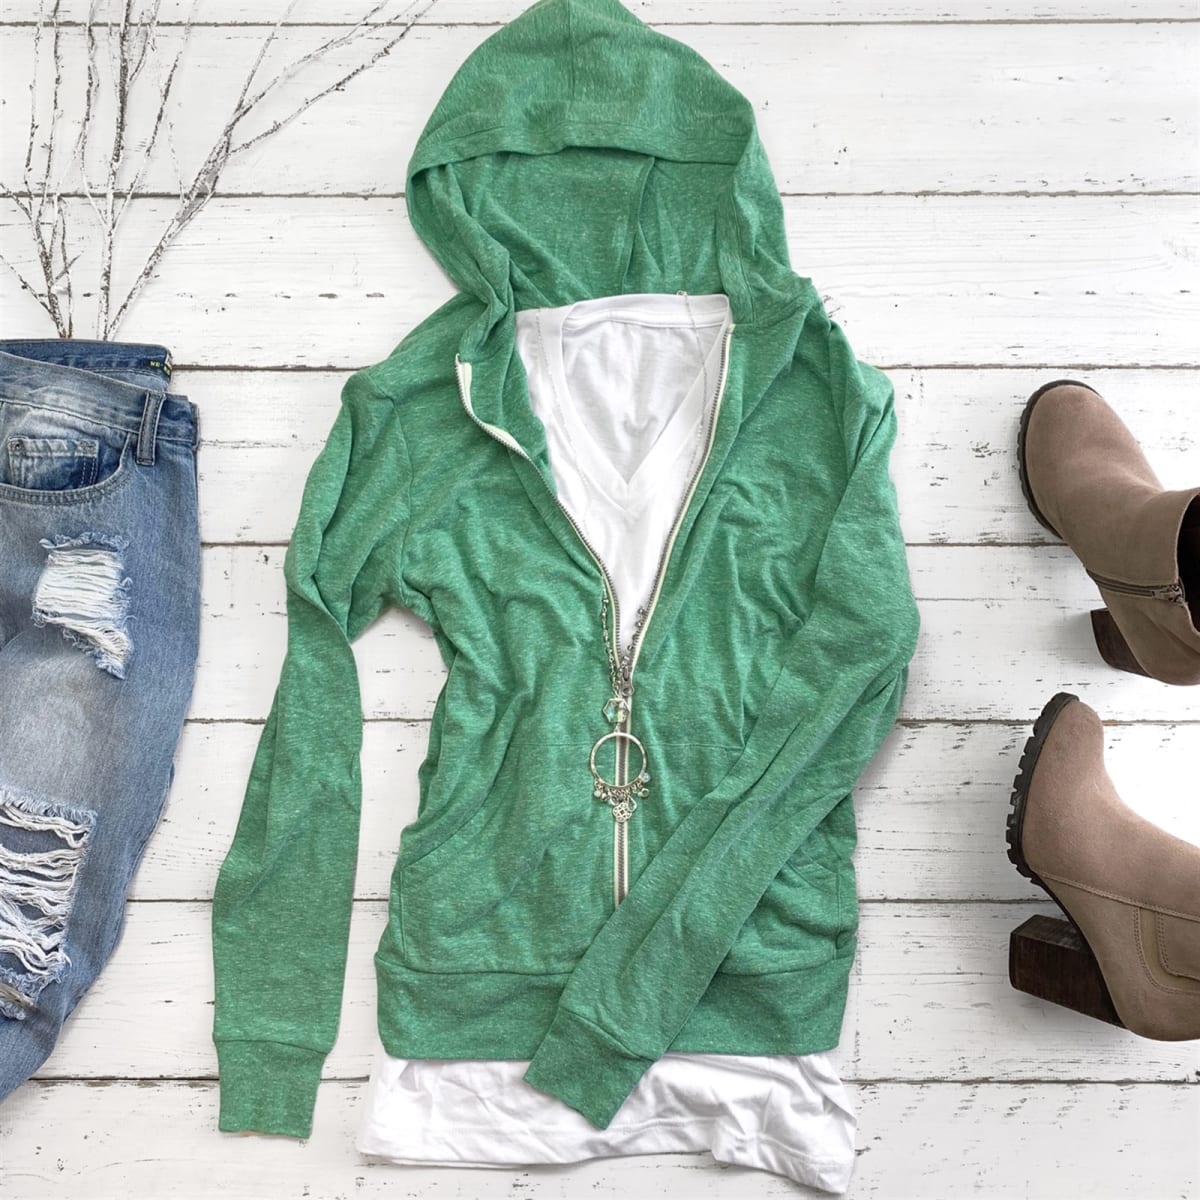 Frosted Tri Blend Hoodie was $24.99, NOW $15.99! - Become a Coupon Queen